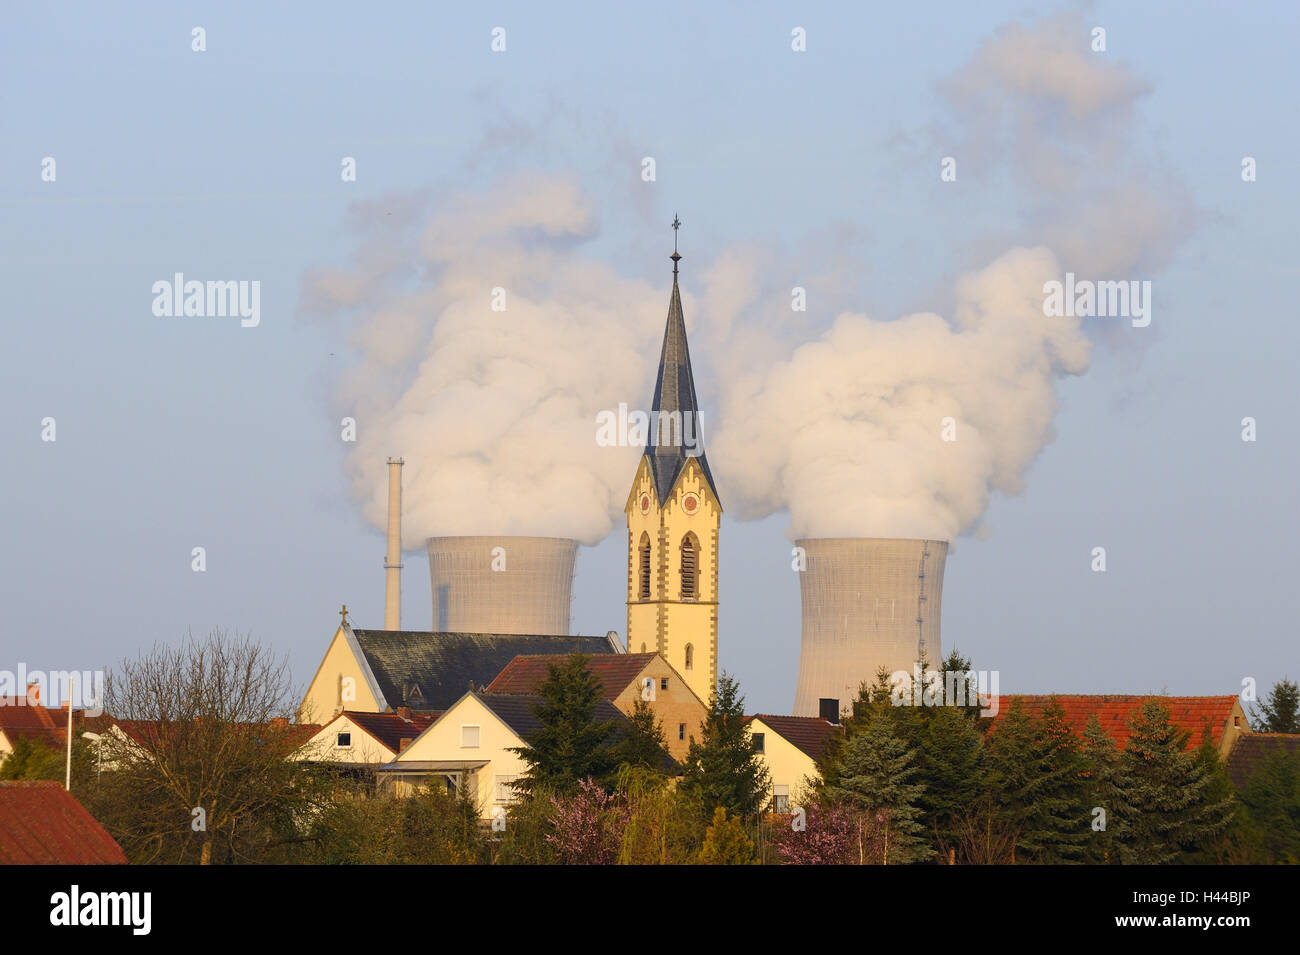 Germany, Bavaria, Lower Franconia, little Rothe, local view, church, nuclear power plant, Stock Photo